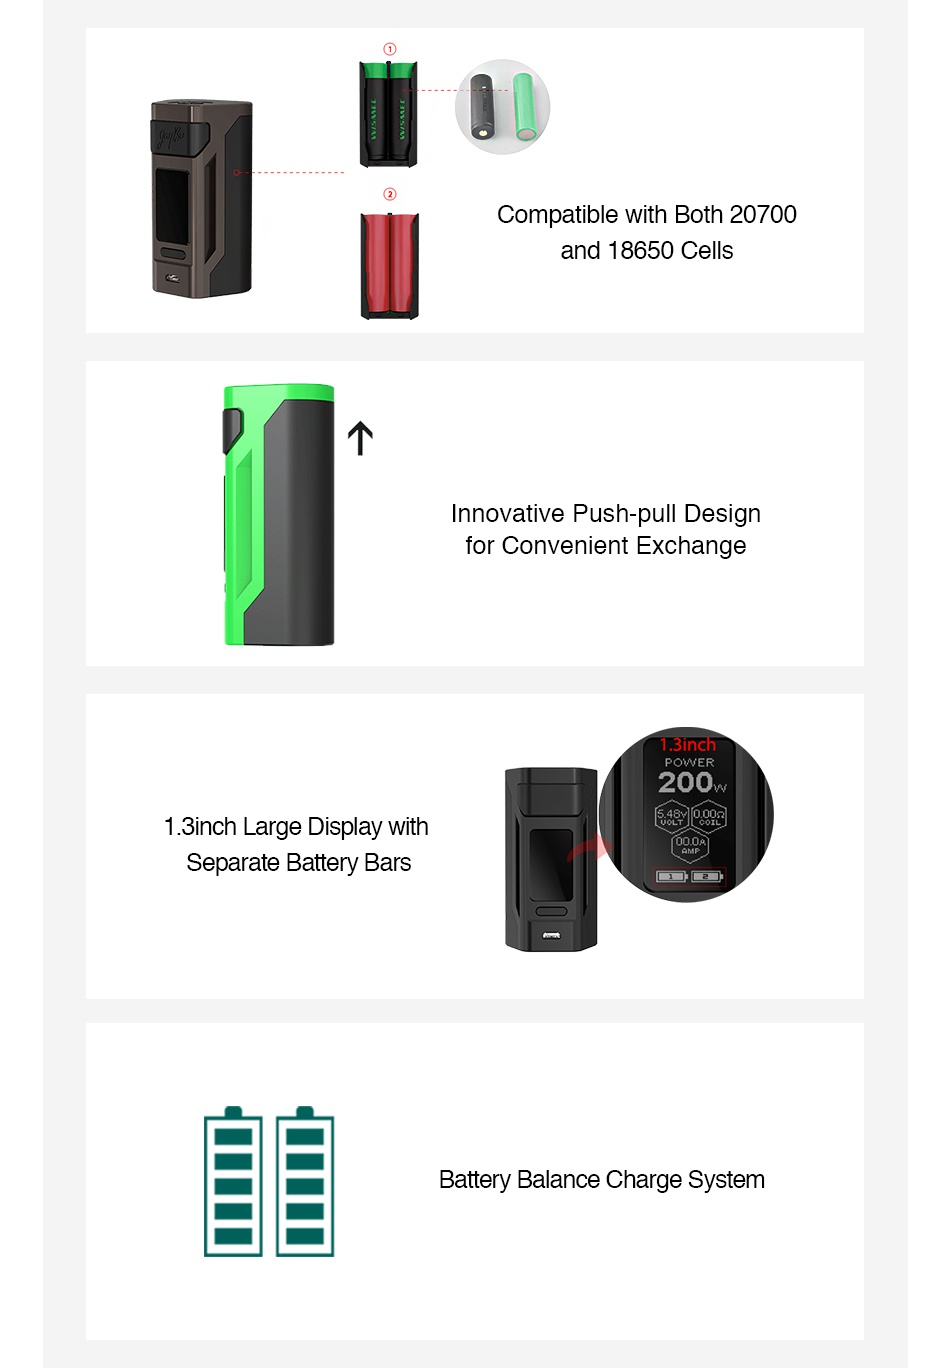 WISMEC Reuleaux RX2 20700 200W TC MOD with Dual Ampking 20700 Batteries 6000mAh Compatible with Both 20700 and 1 8650 Ce novative Push pull Design for Convenient exchange 200 1 3inch Large Display with Separate Battery Bars Battery Balance Charge System